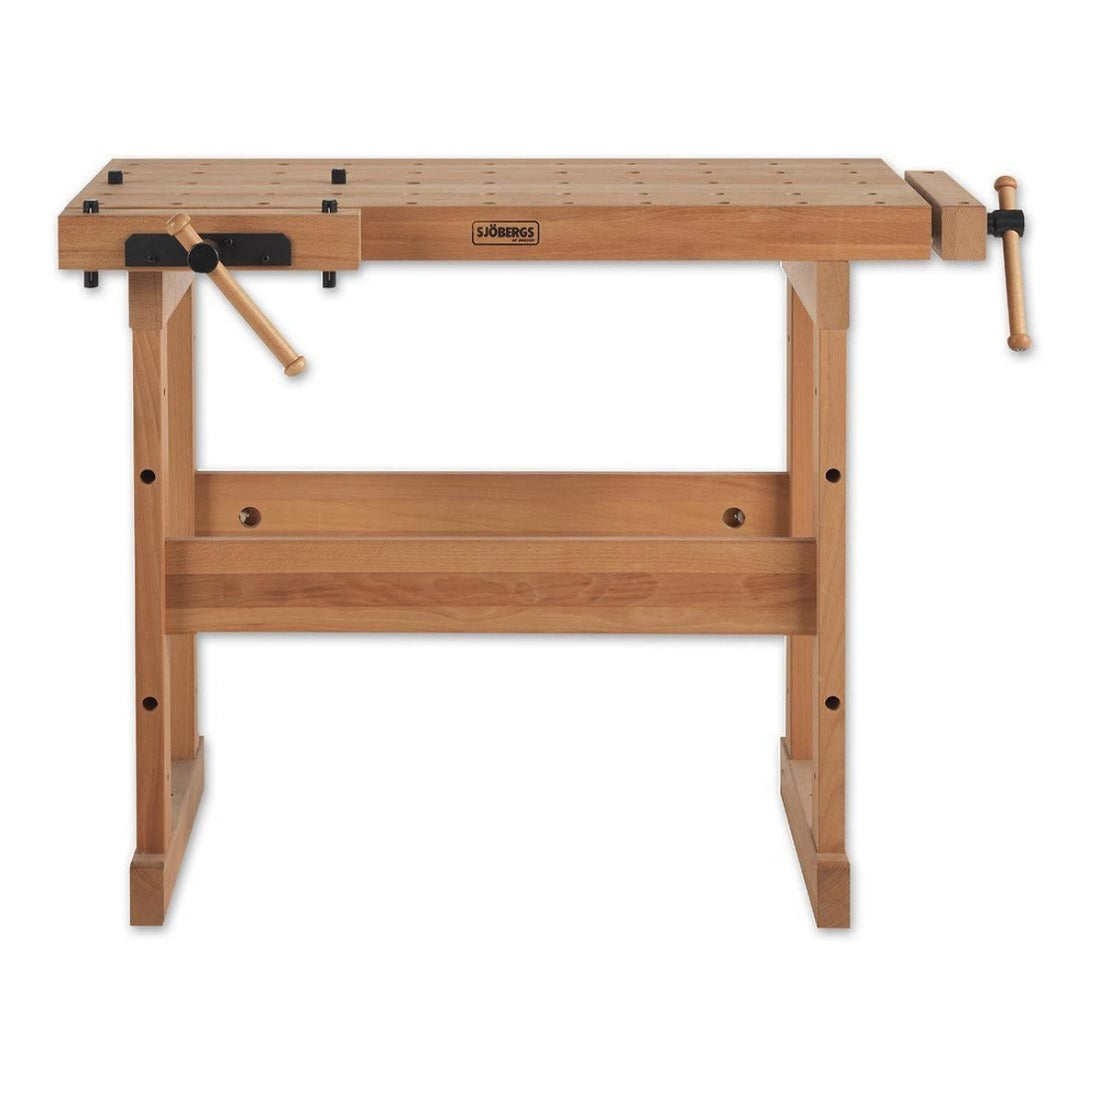 same description as last for the Sjoberb multi hole work bench  from a different angle